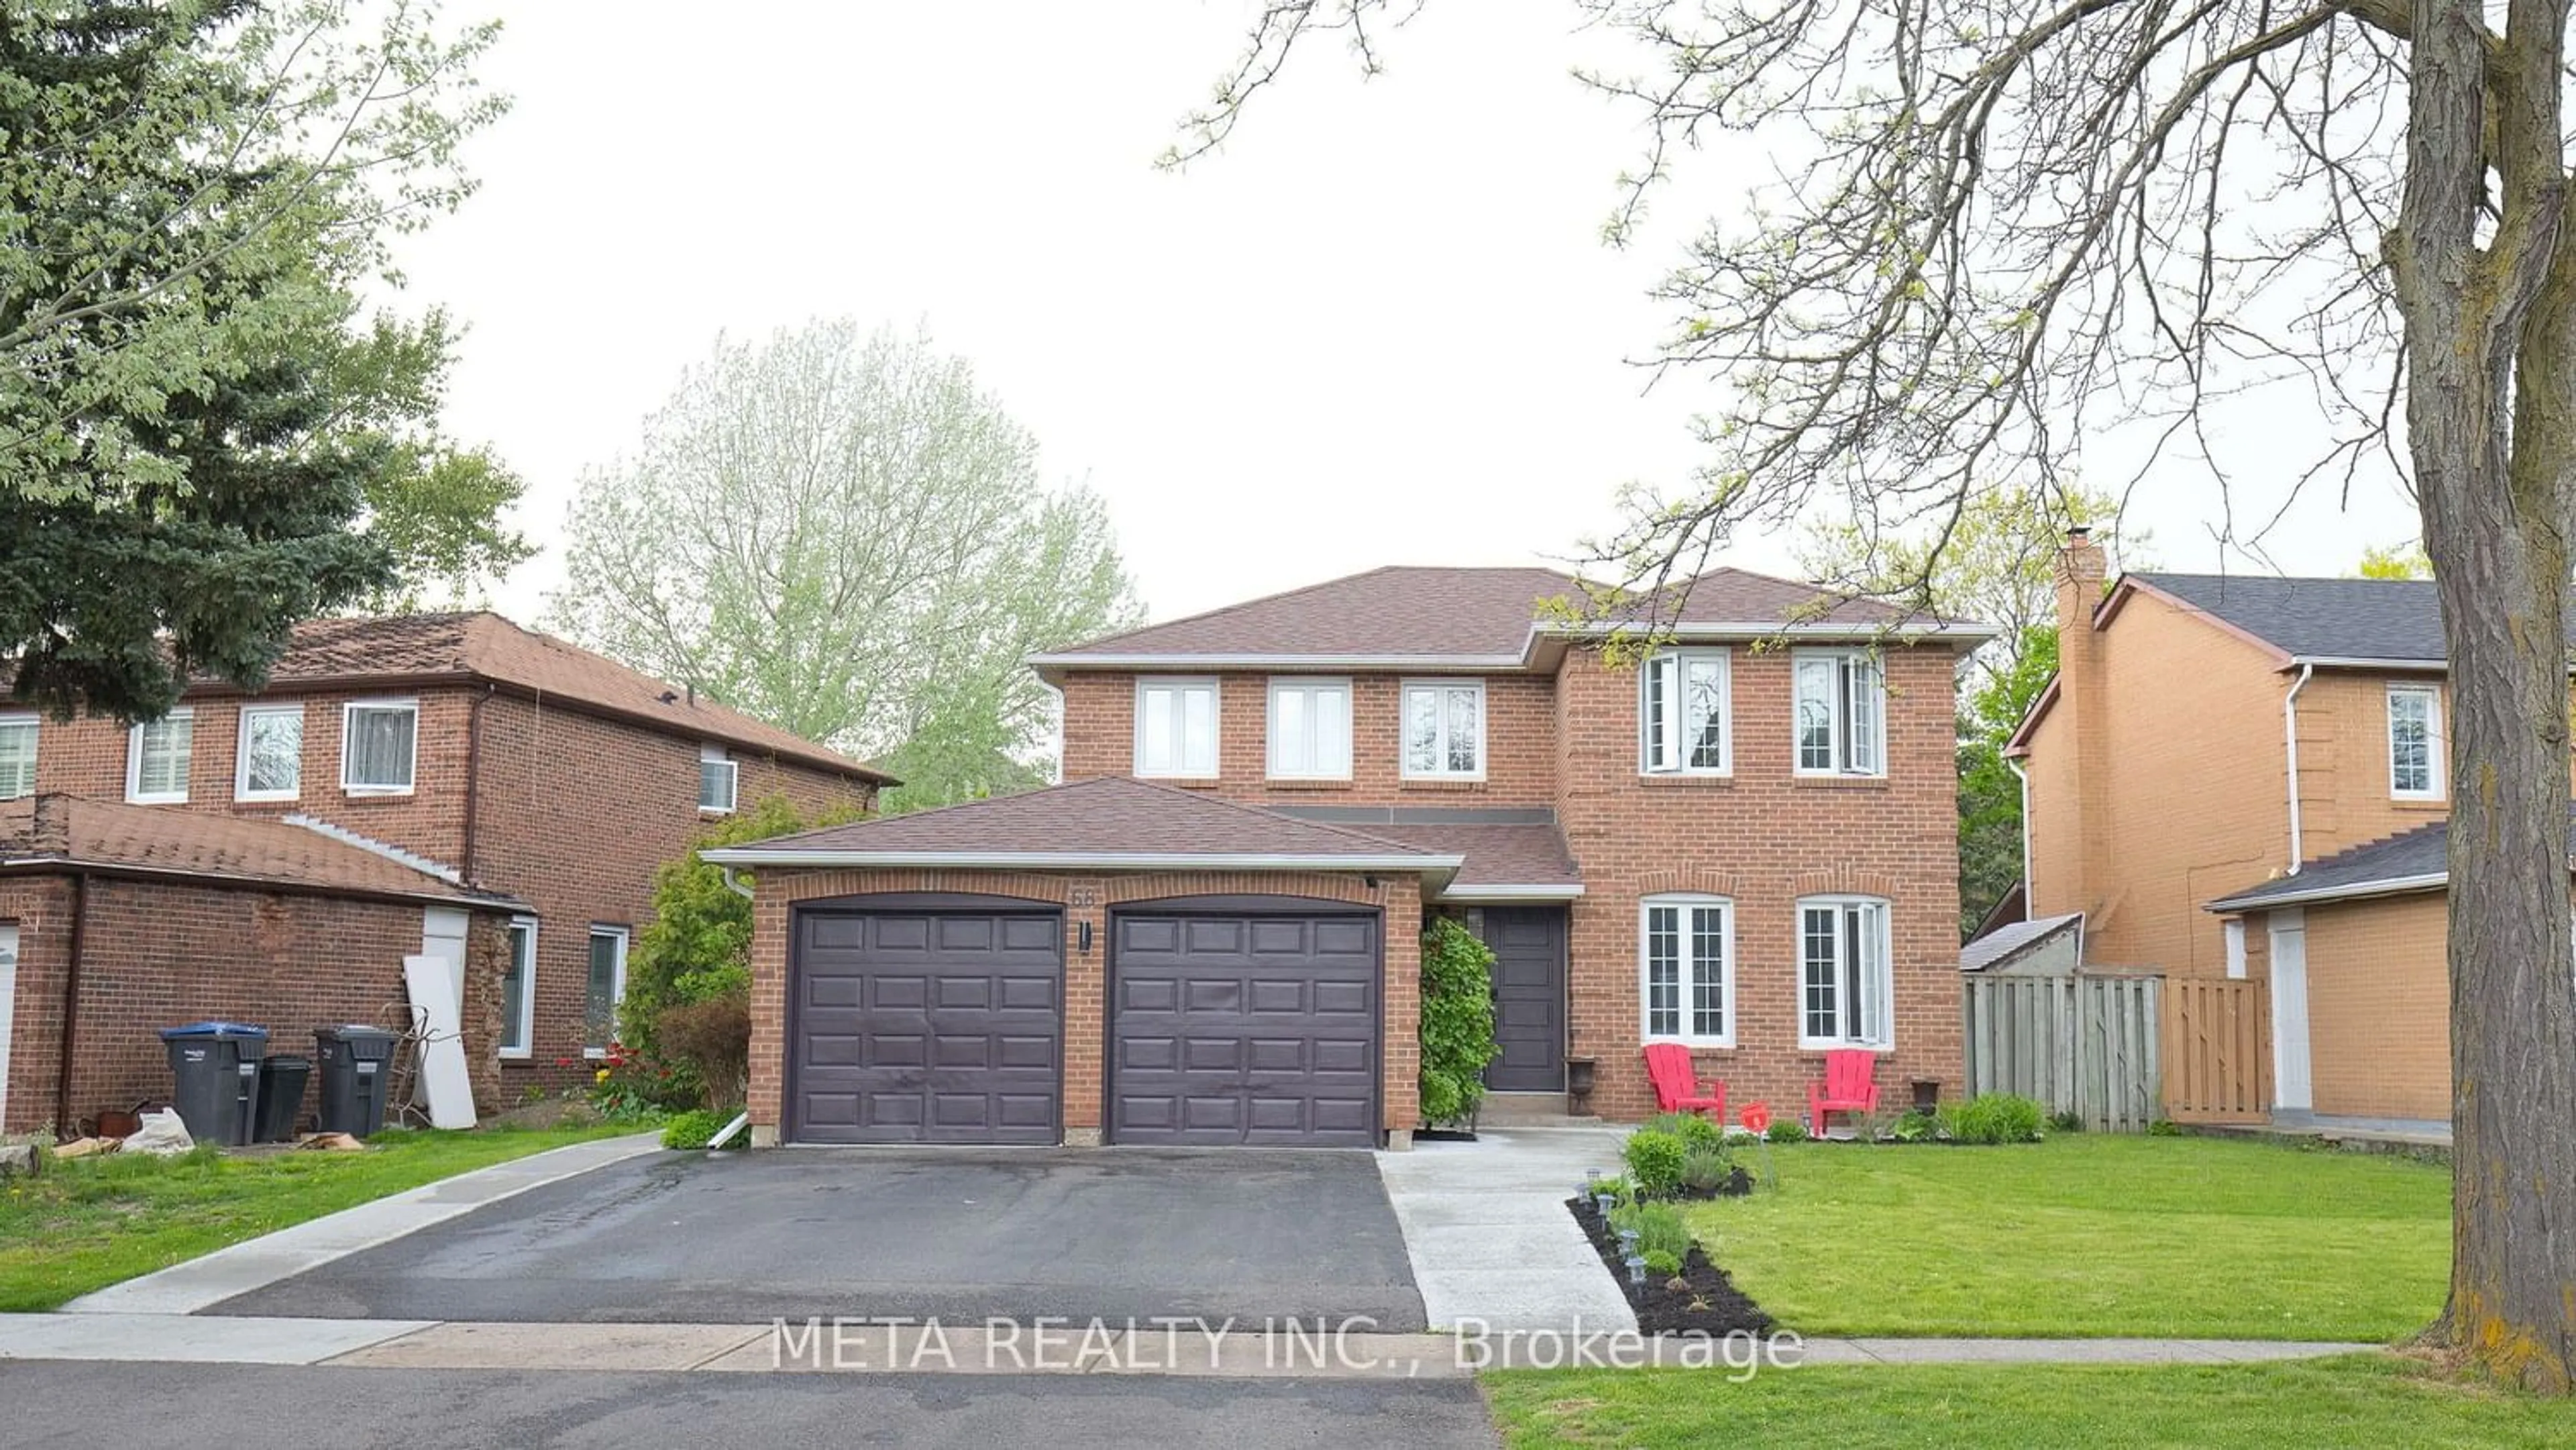 Home with brick exterior material for 68 Jayfield Rd, Brampton Ontario L6S 3G8